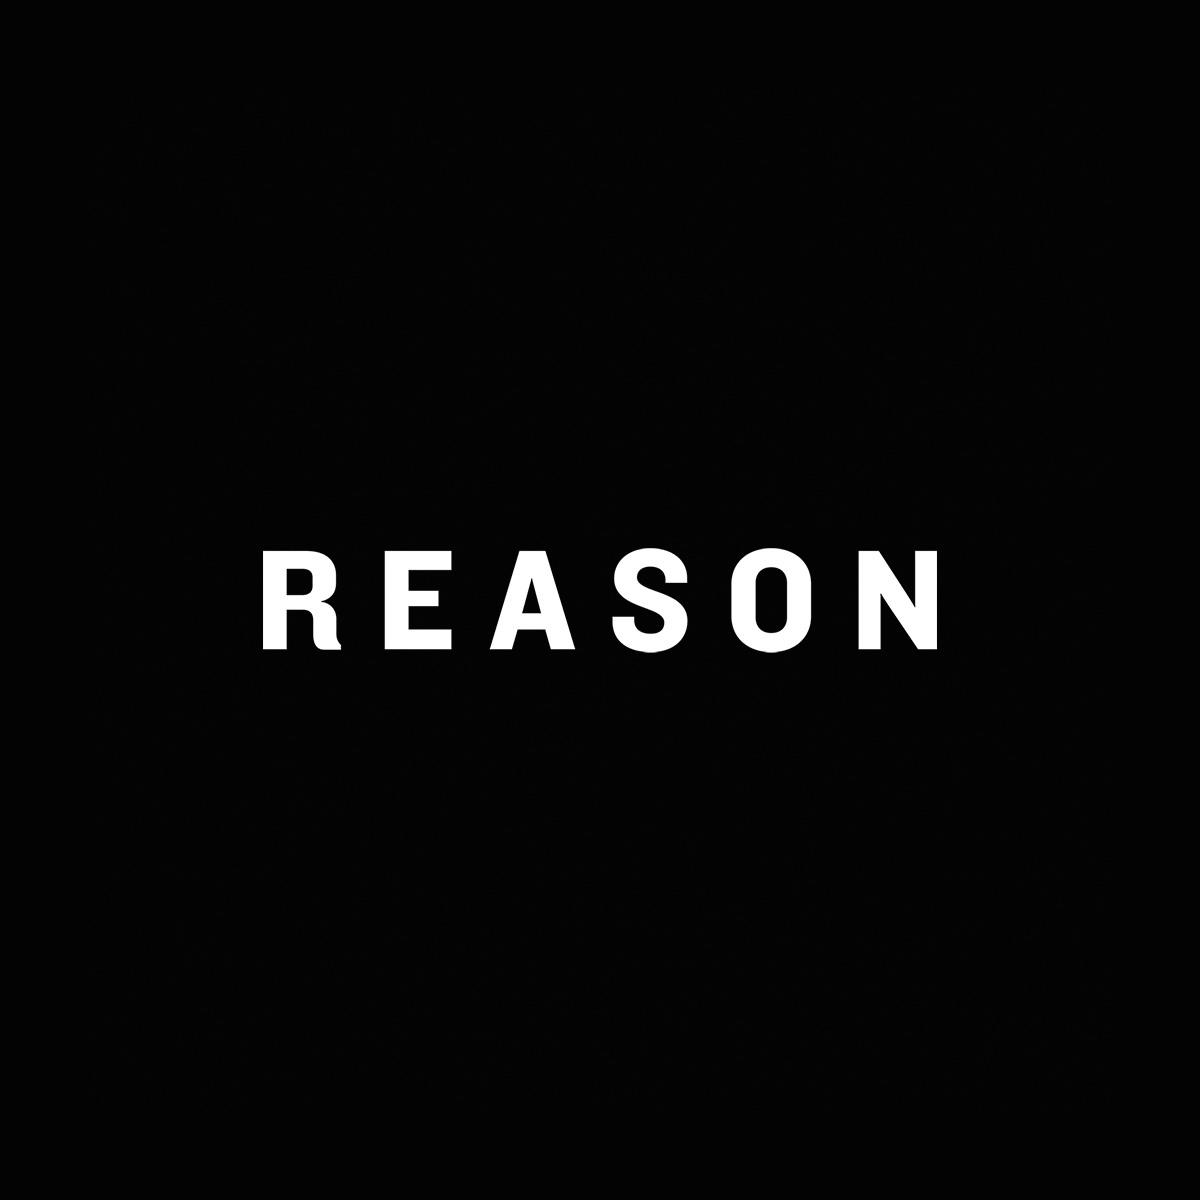 Reason's images